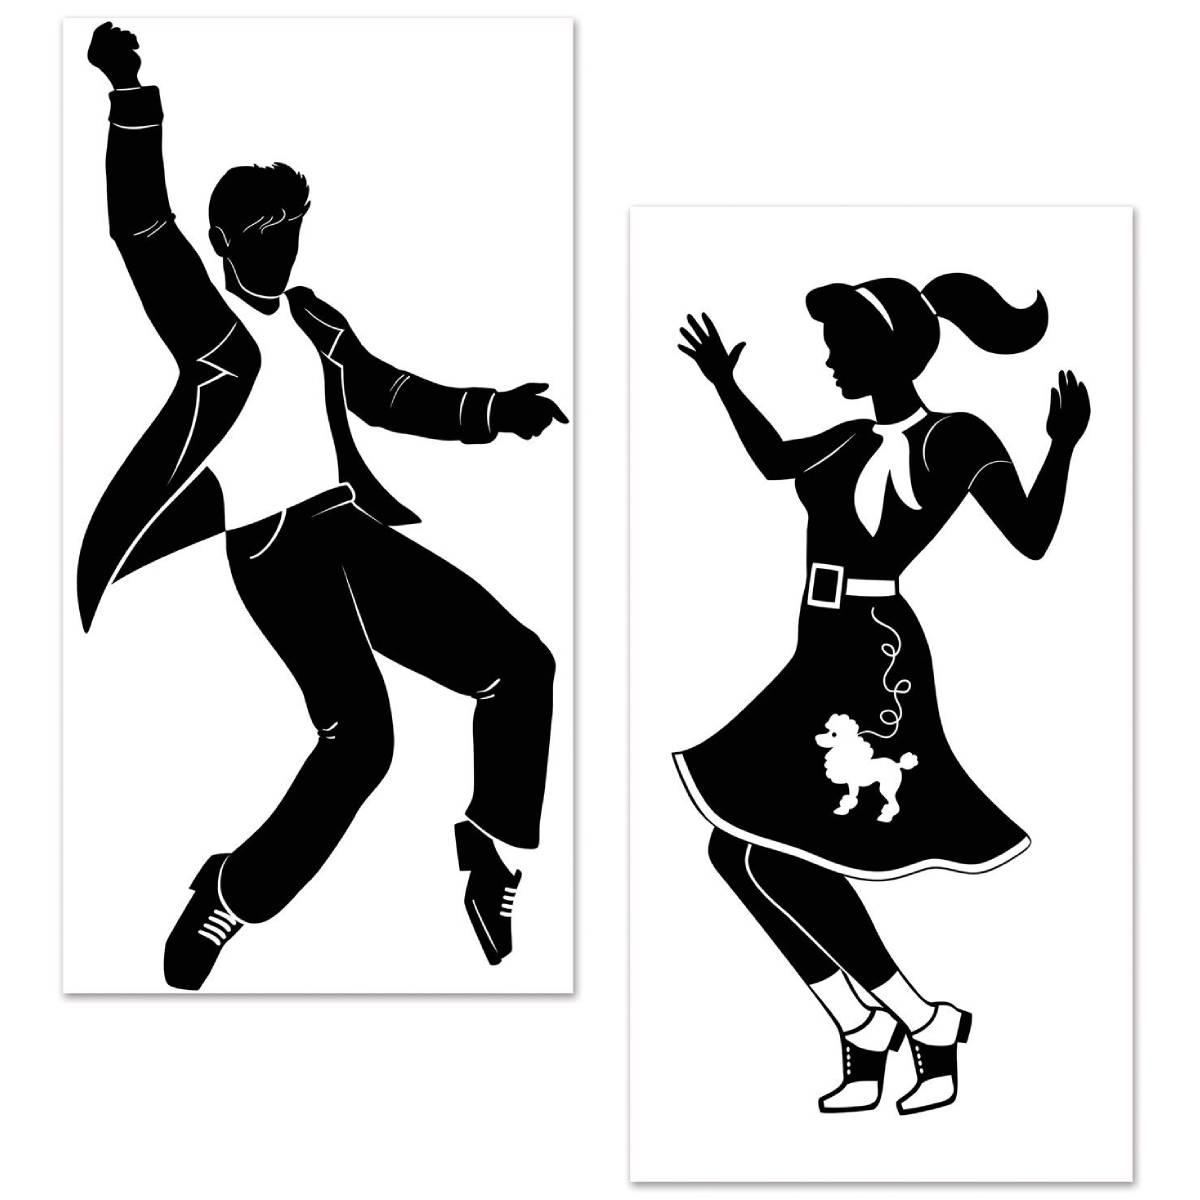 Fabulous 50s Rock and Roll Dancers Silhouettes by Beistle 59916 available here at Karnival Costumes online party shop